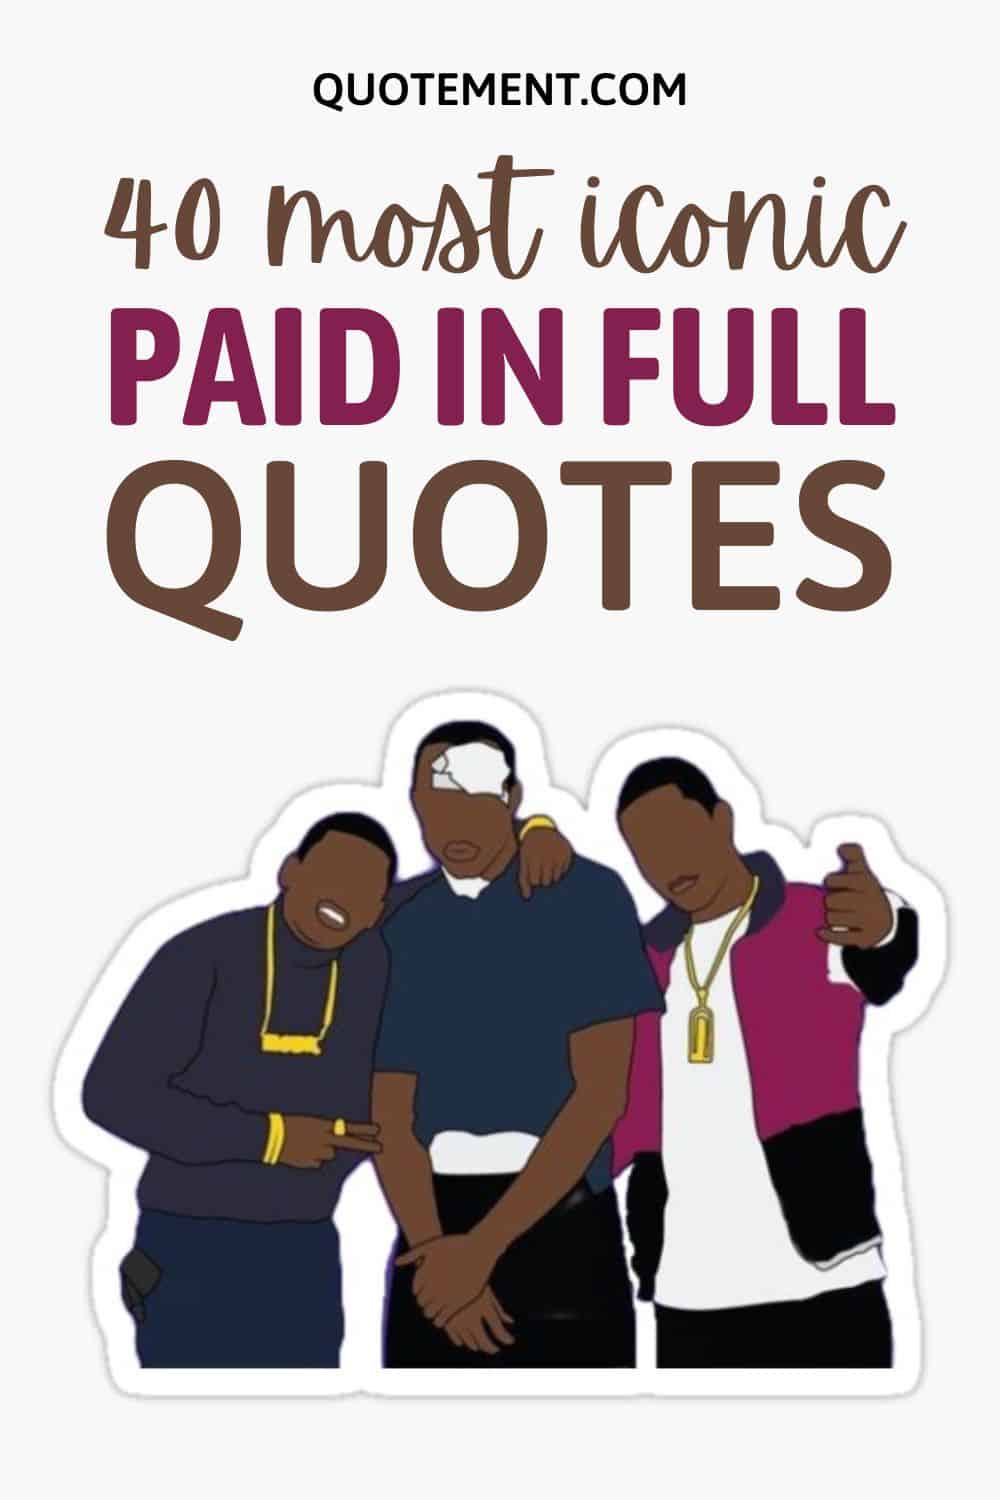 40 Paid In Full Quotes To Teach You Important Life Lessons
